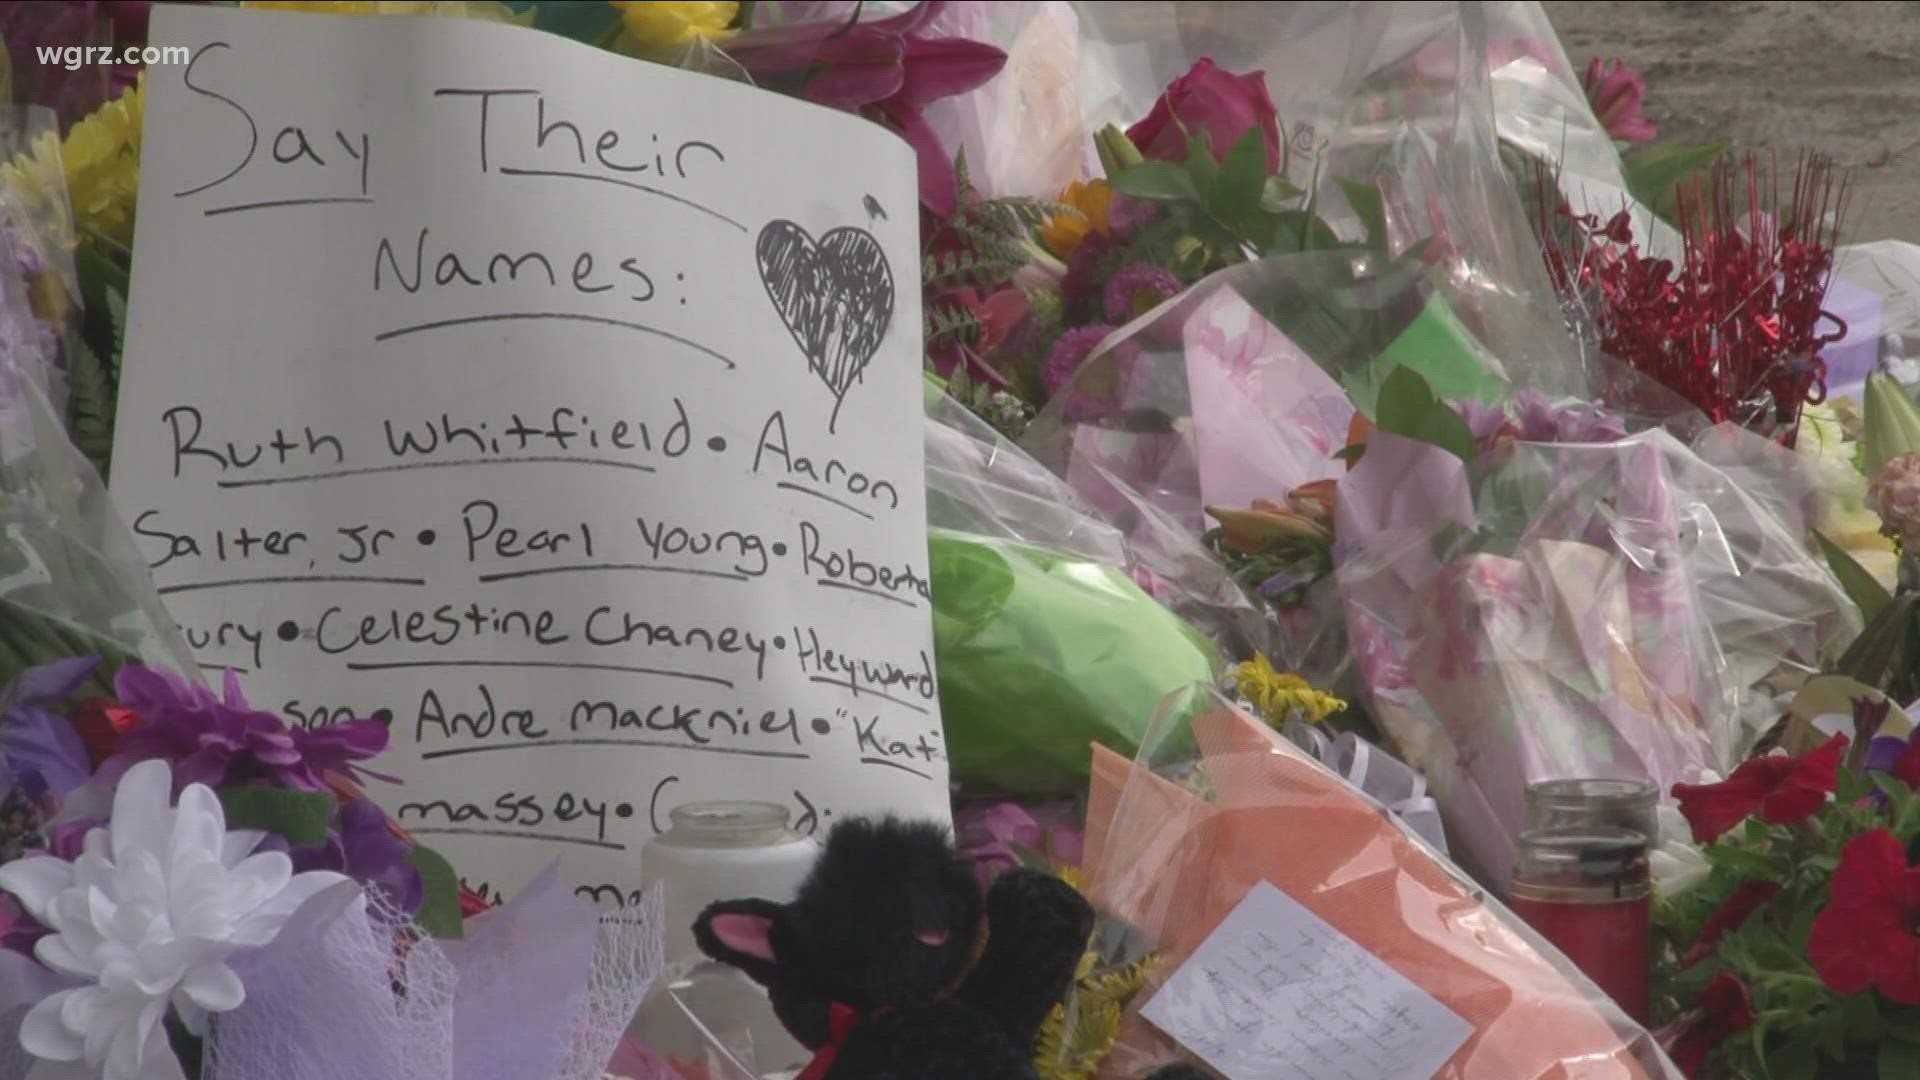 More memorials popping up outside Tops market on Jefferson Avenue